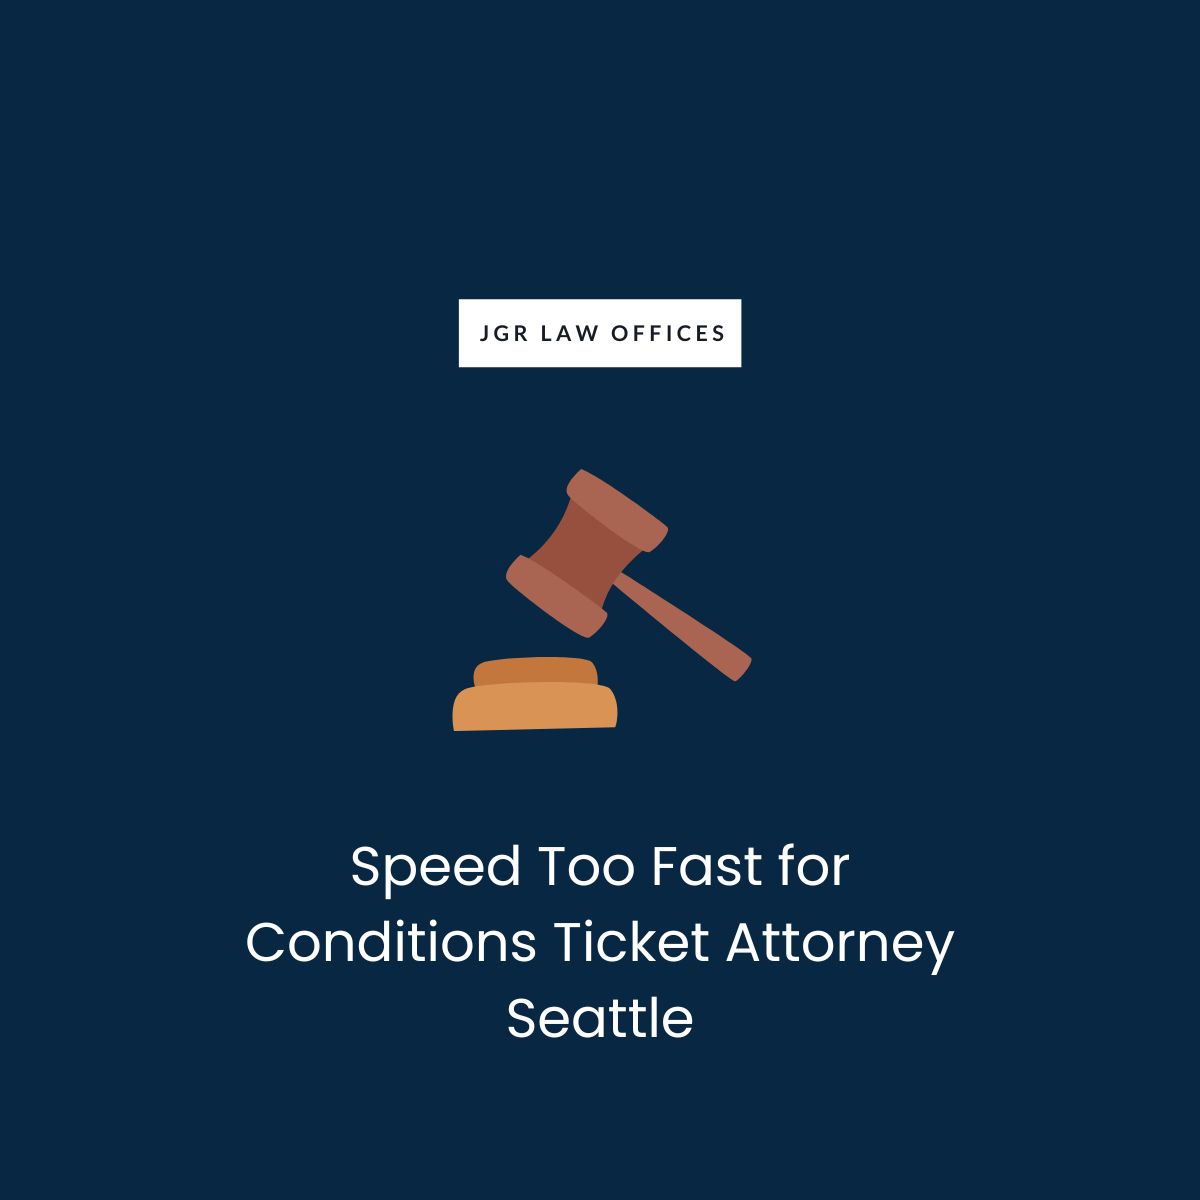 Speed Too Fast for Conditions Ticket Attorney Seattle